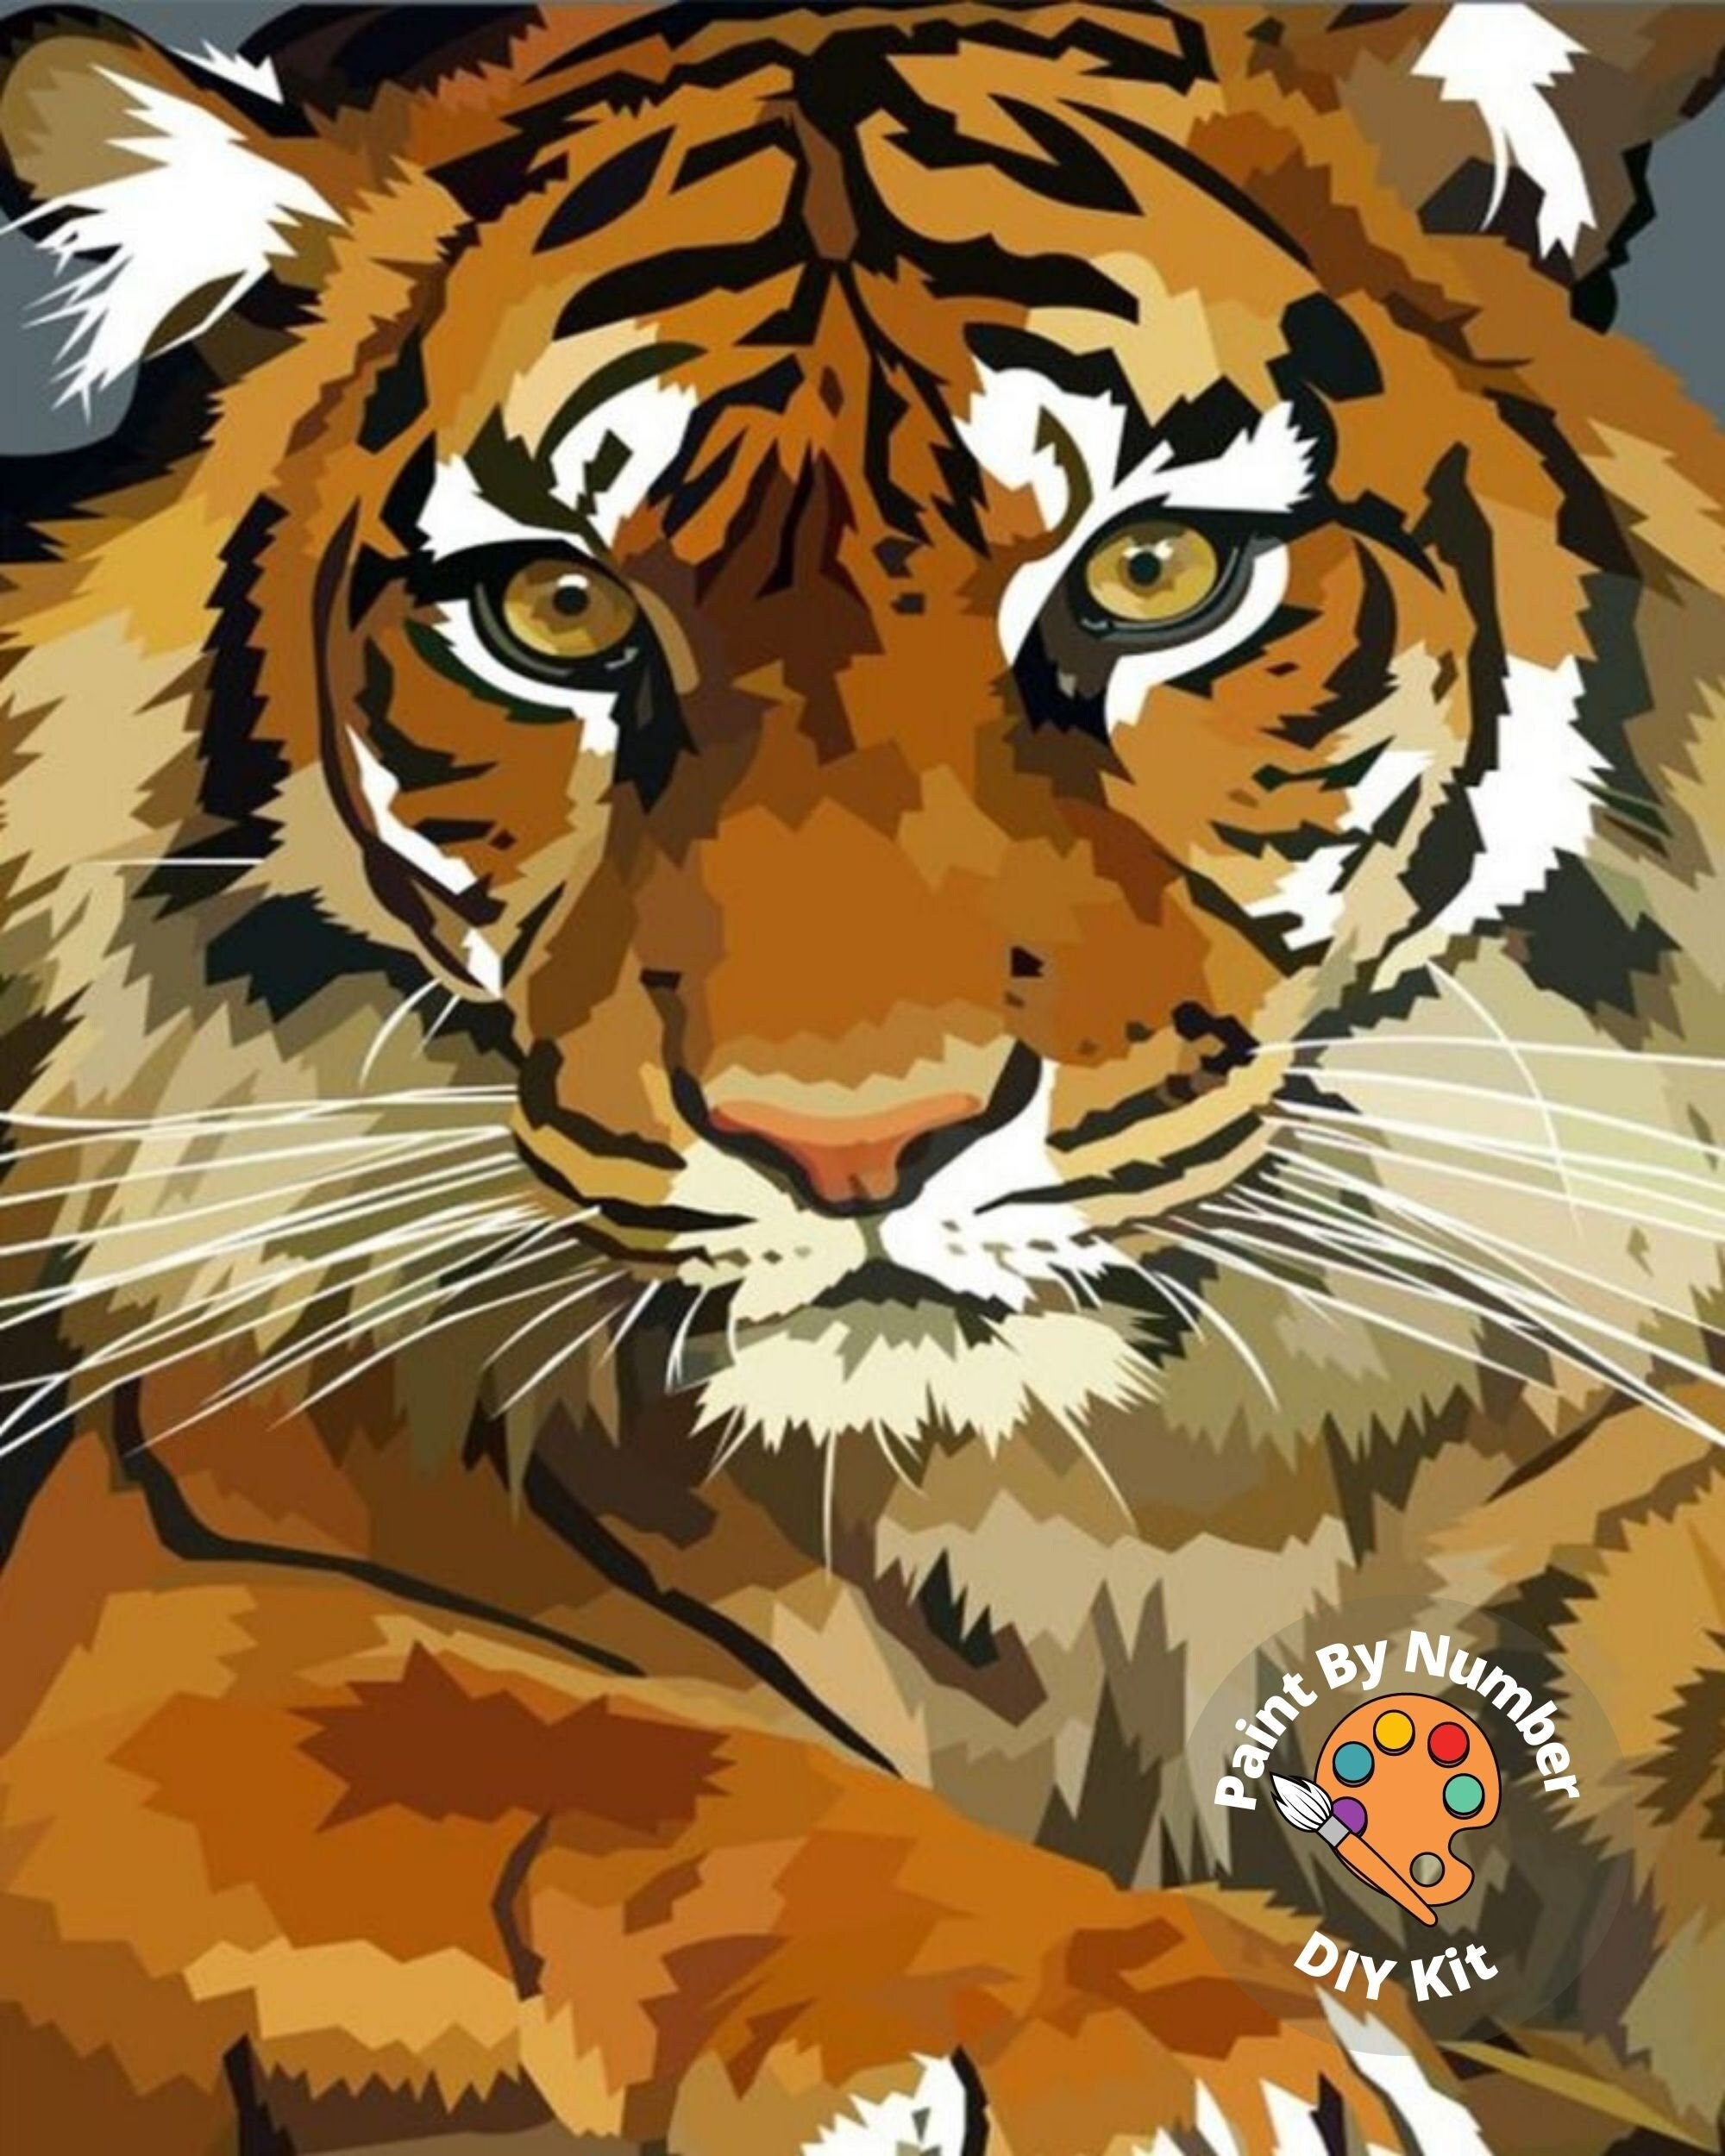 Tiger Paint by Numbers Kits Canvas Painting for Adults Beginner and Kids with Acrylic Paints and Brushes 